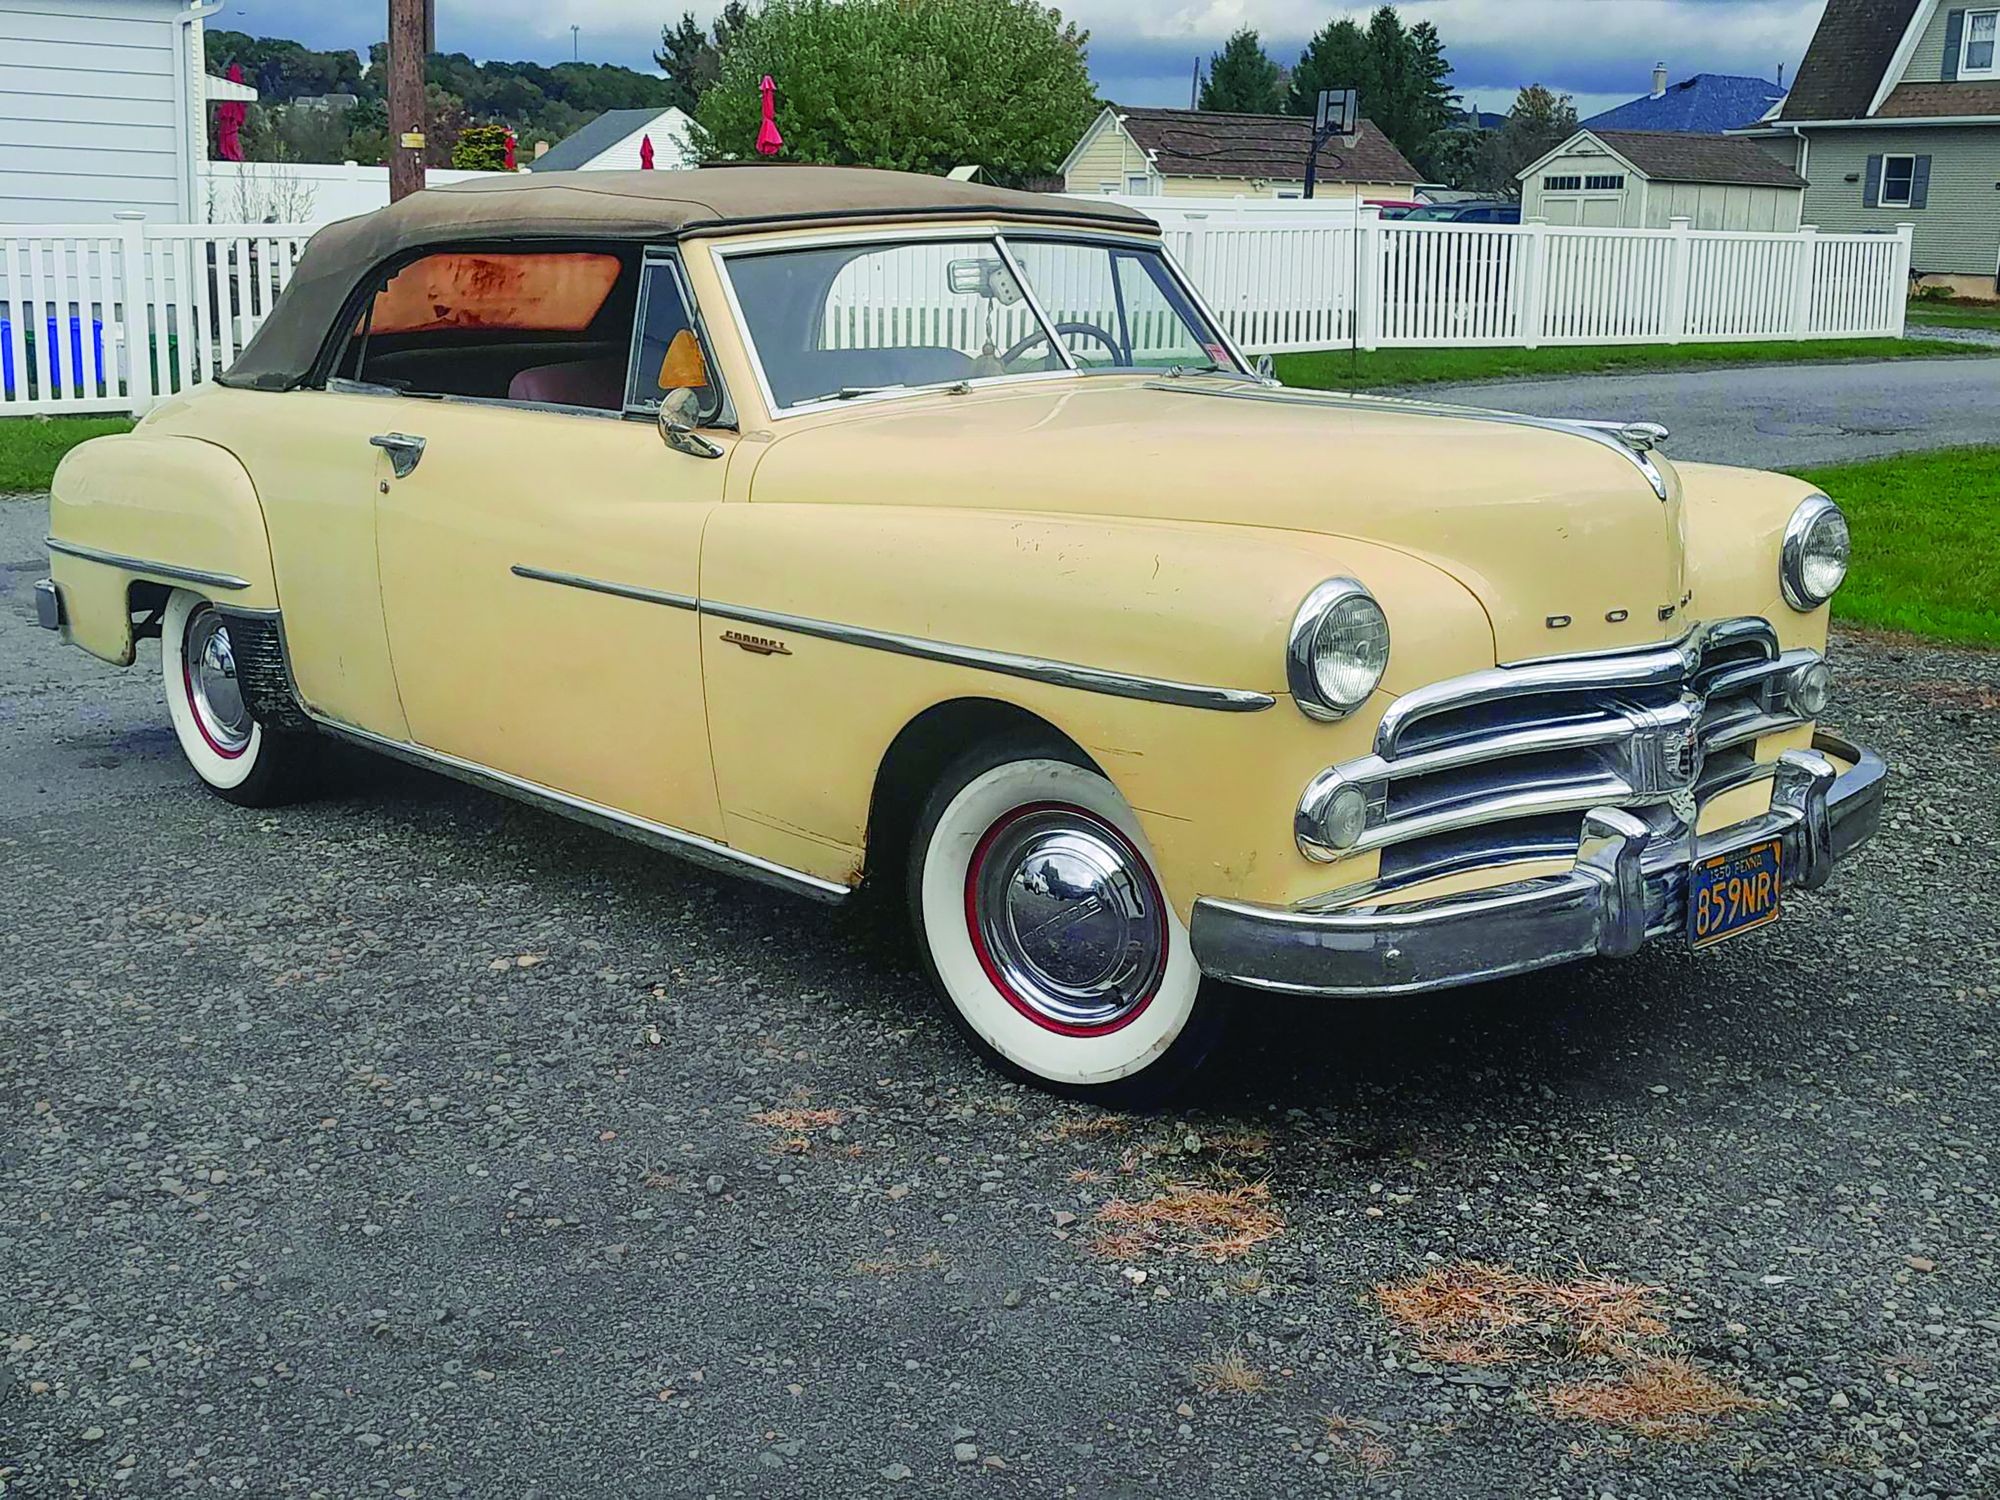 This 1950 Dodge Coronet Made For A Pleasant Interruption